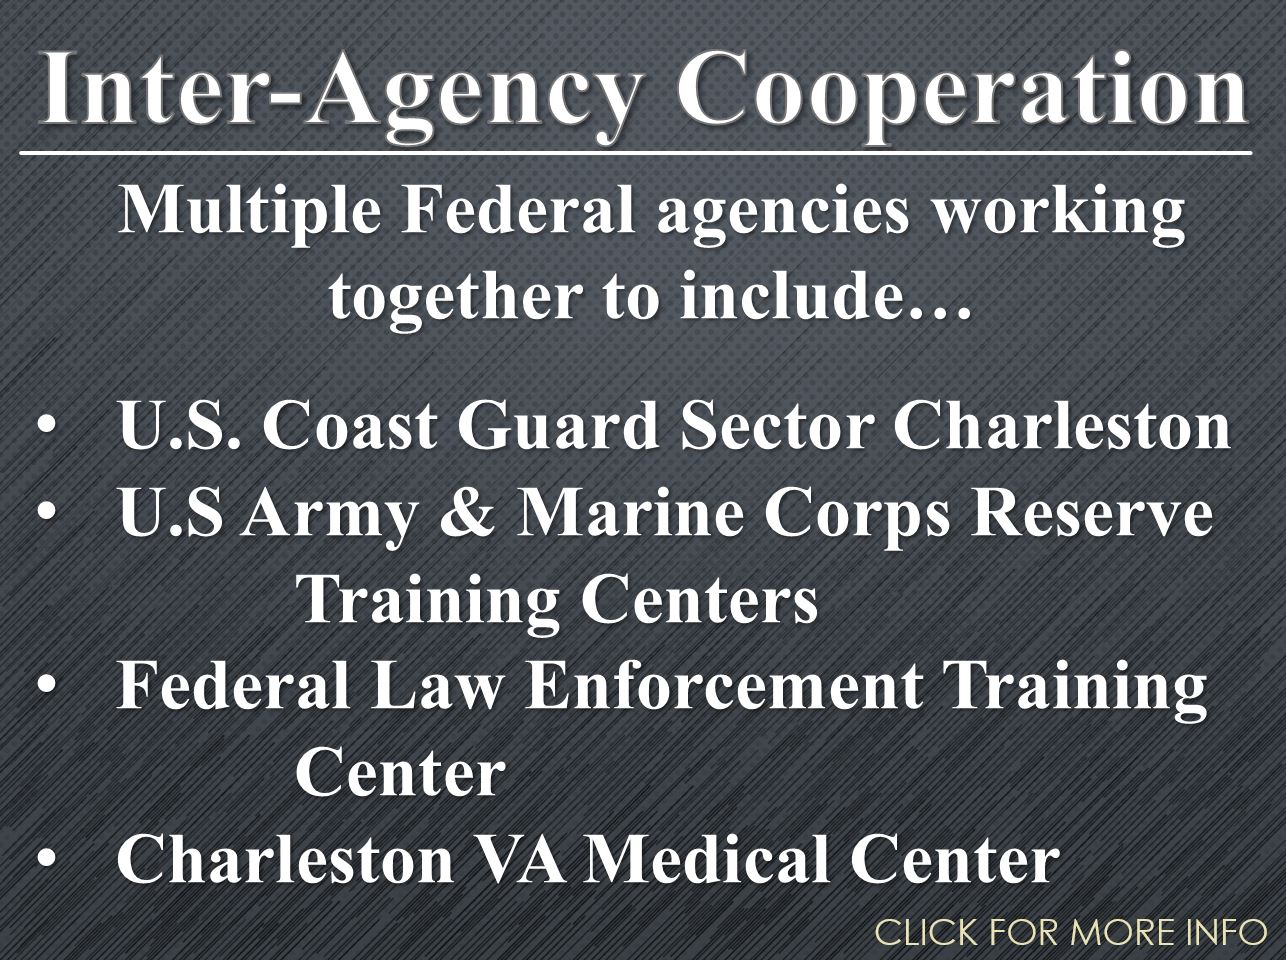 An infographic for Inter-Agency Cooperation